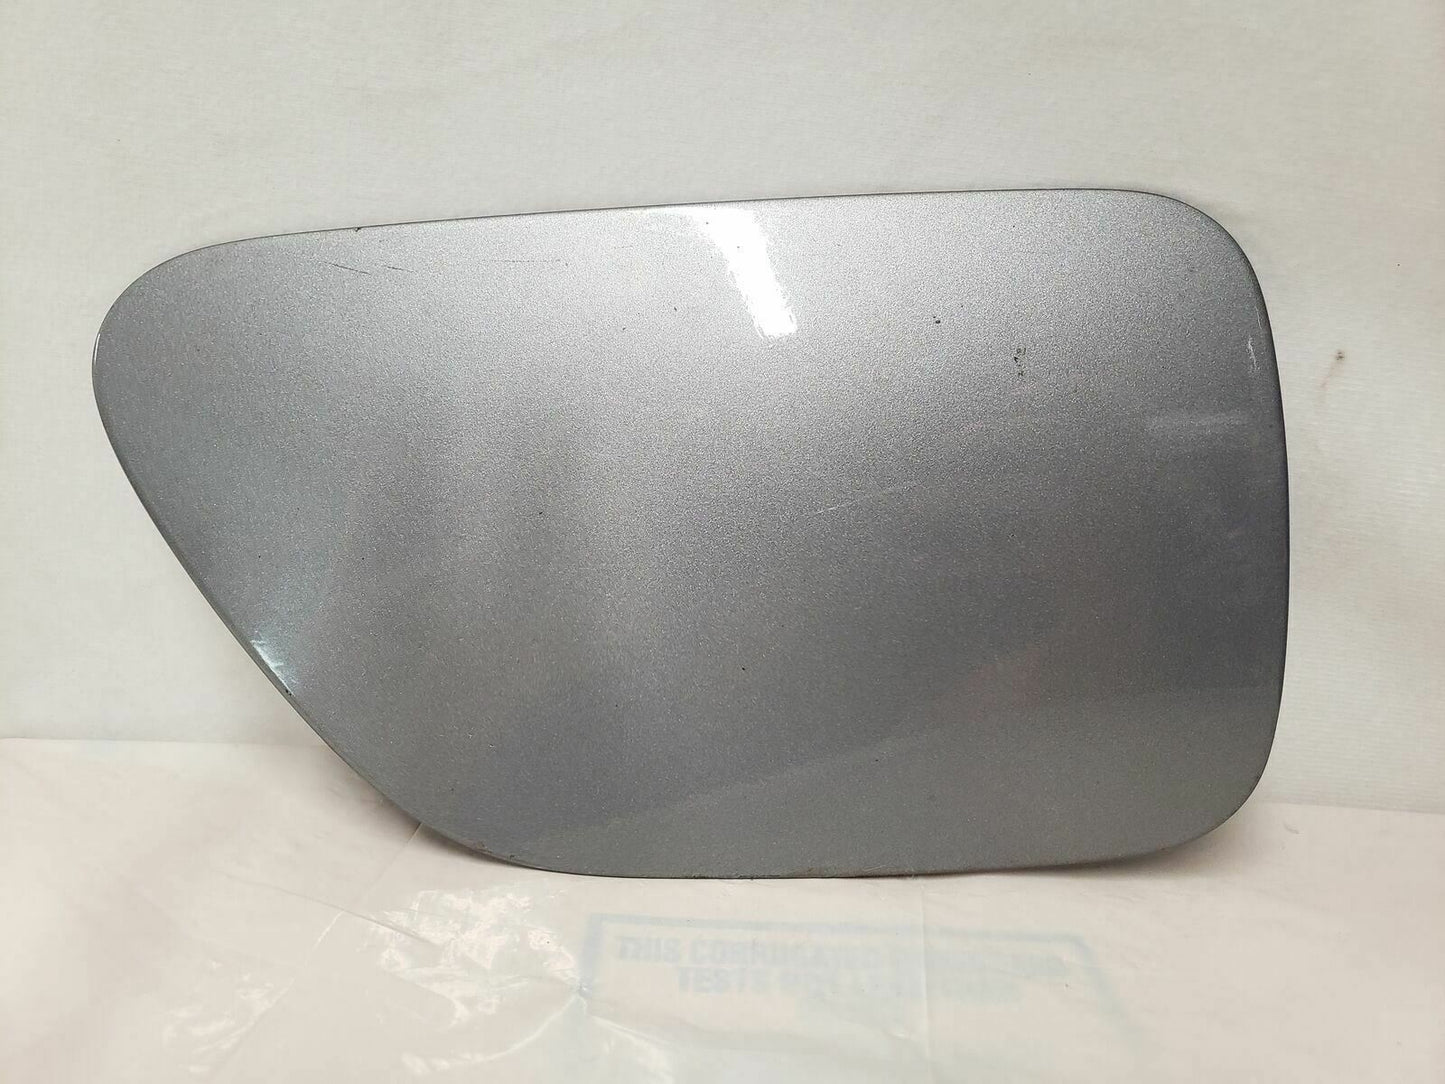 2006 BMW 650i Gas Door Cover Part Number   E63 Series OEM